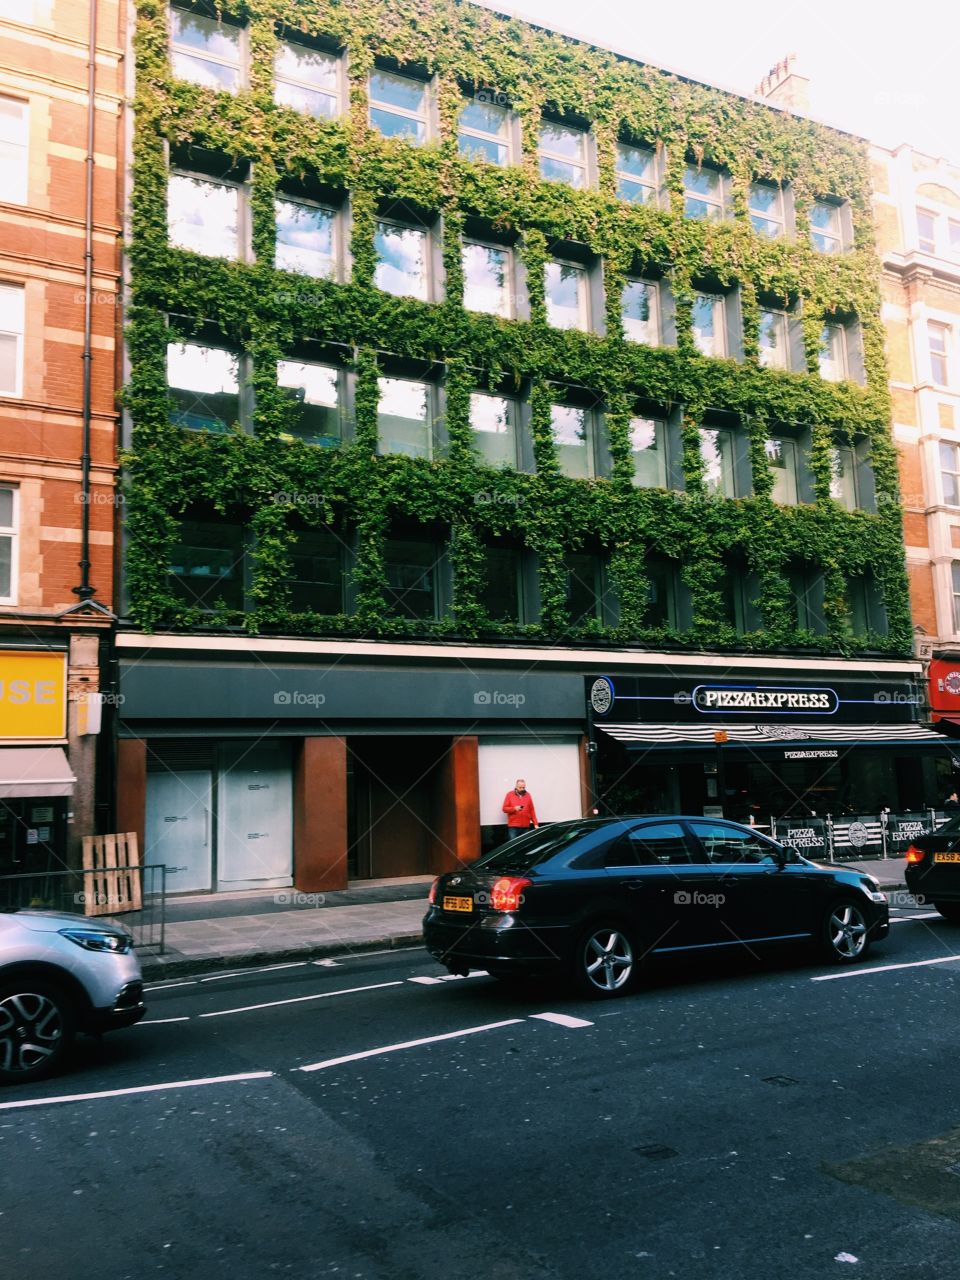 Building of Pizza express in London with vines and leaves over the windows